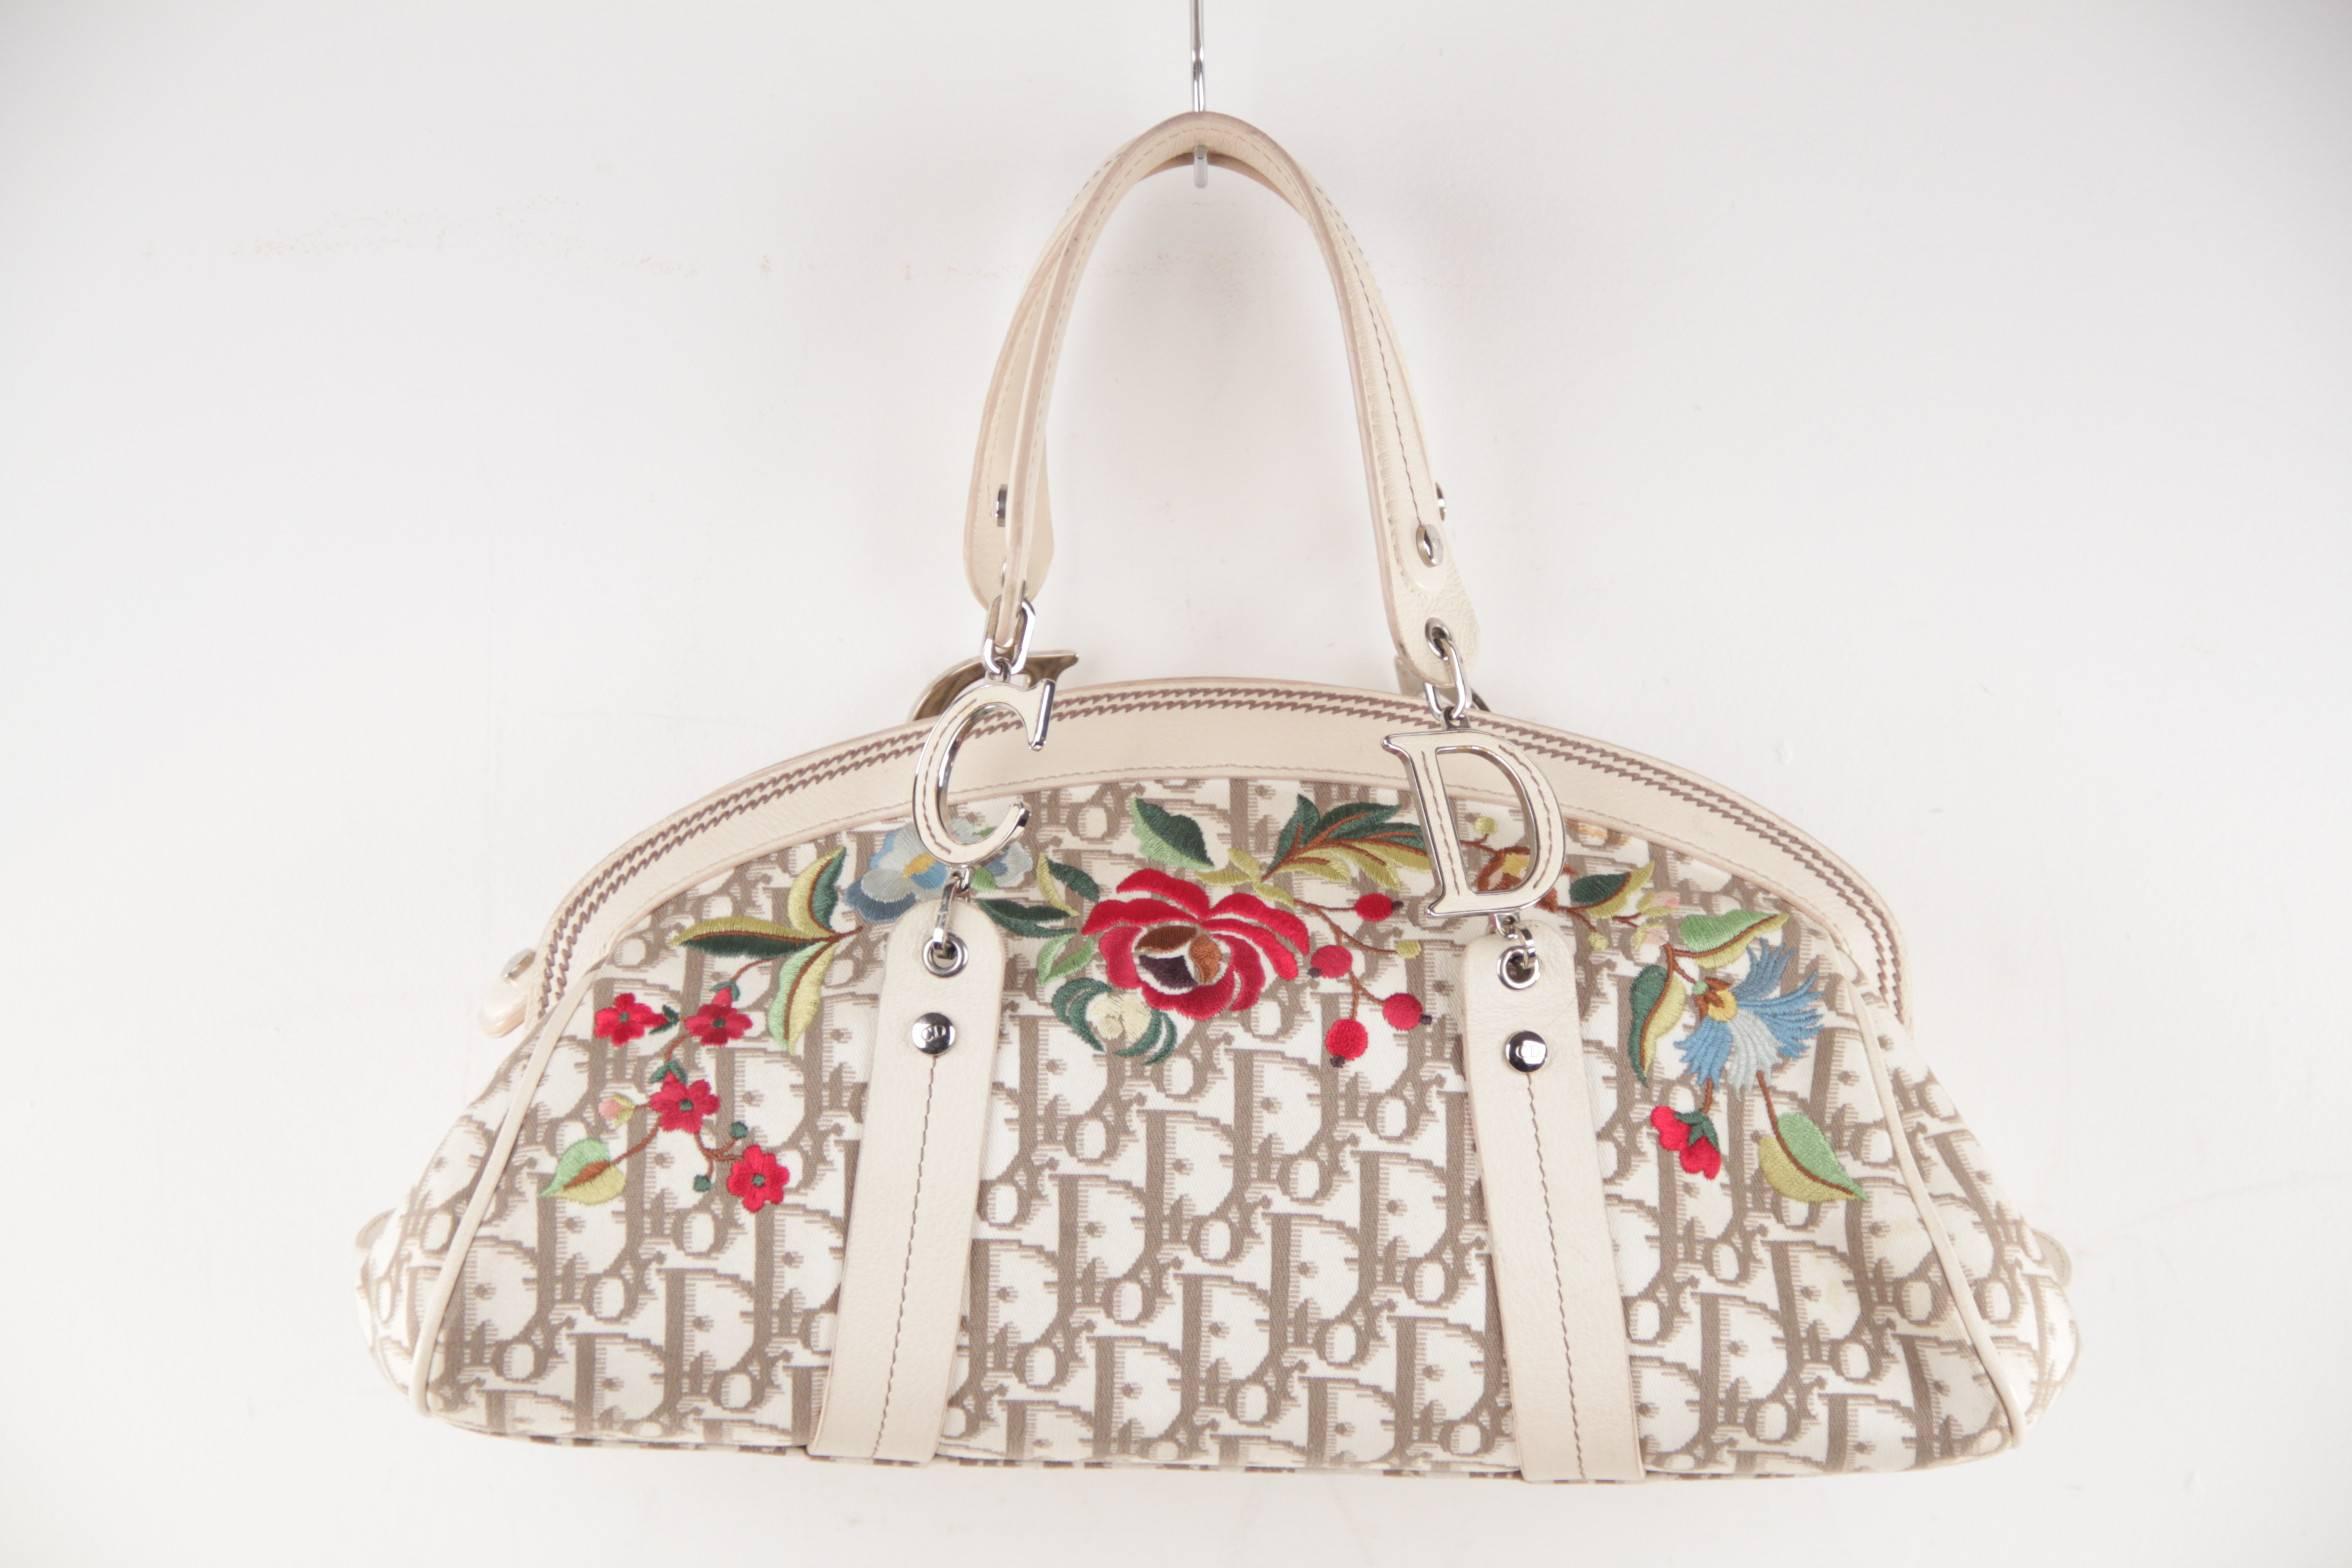  - Beige and white 'Diorissimo' canvas Christian Dior handle bag
- Multicolor floral embroidery at front face
- Silver-tone hardware
- Gleaming silver C and D hardware
- Upper zipper closure
- 5 protective bottom feet
- Dual flat handles
-